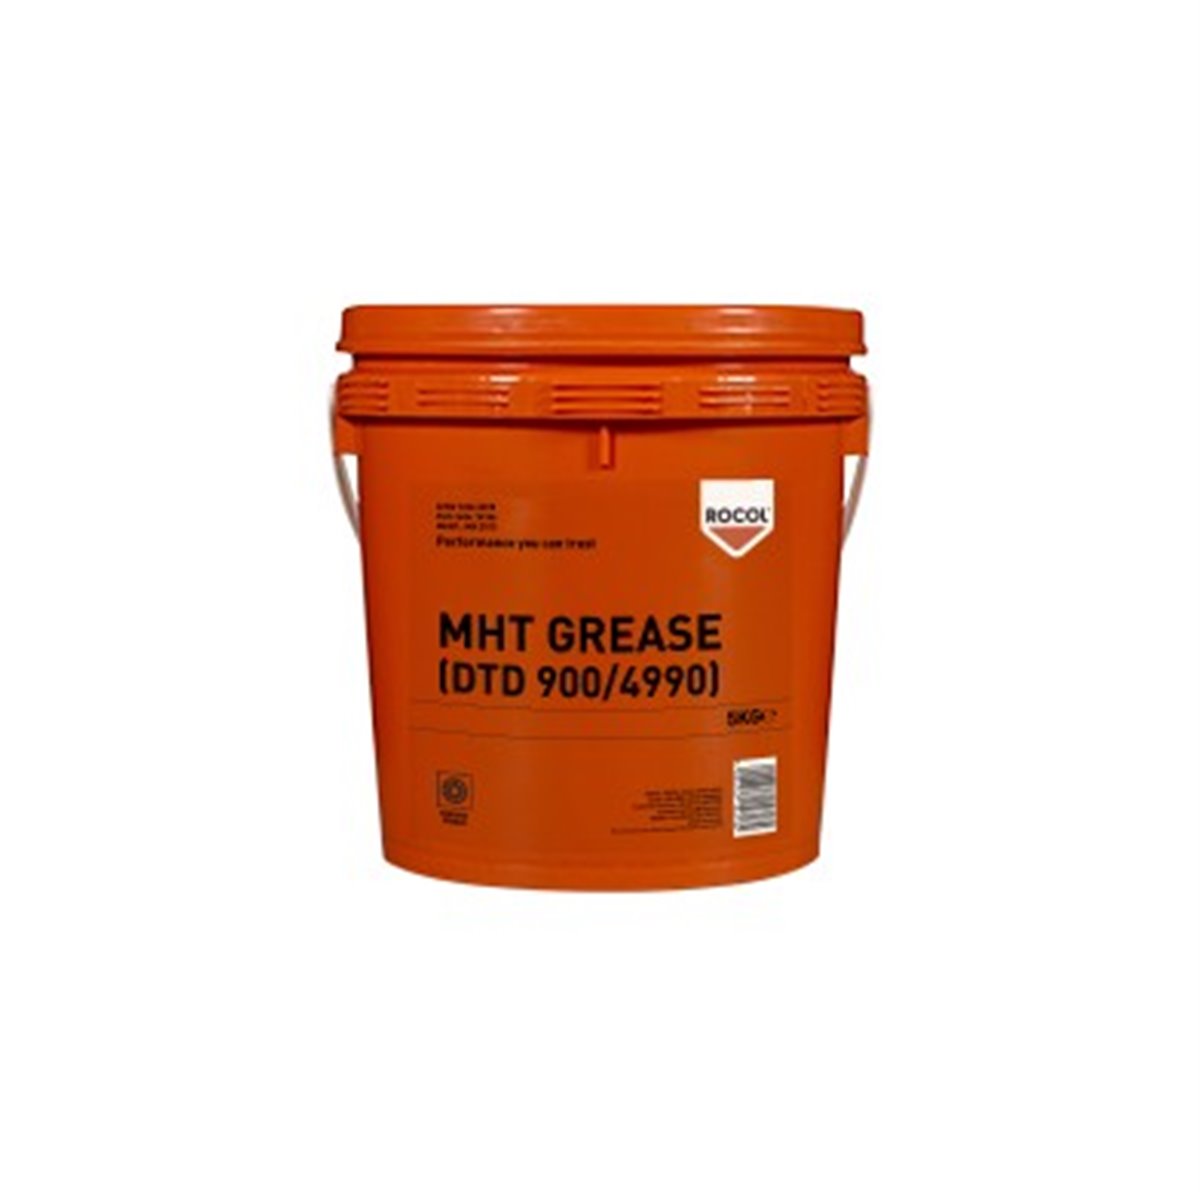 MHT GREASE Rocol 5kg RS16166